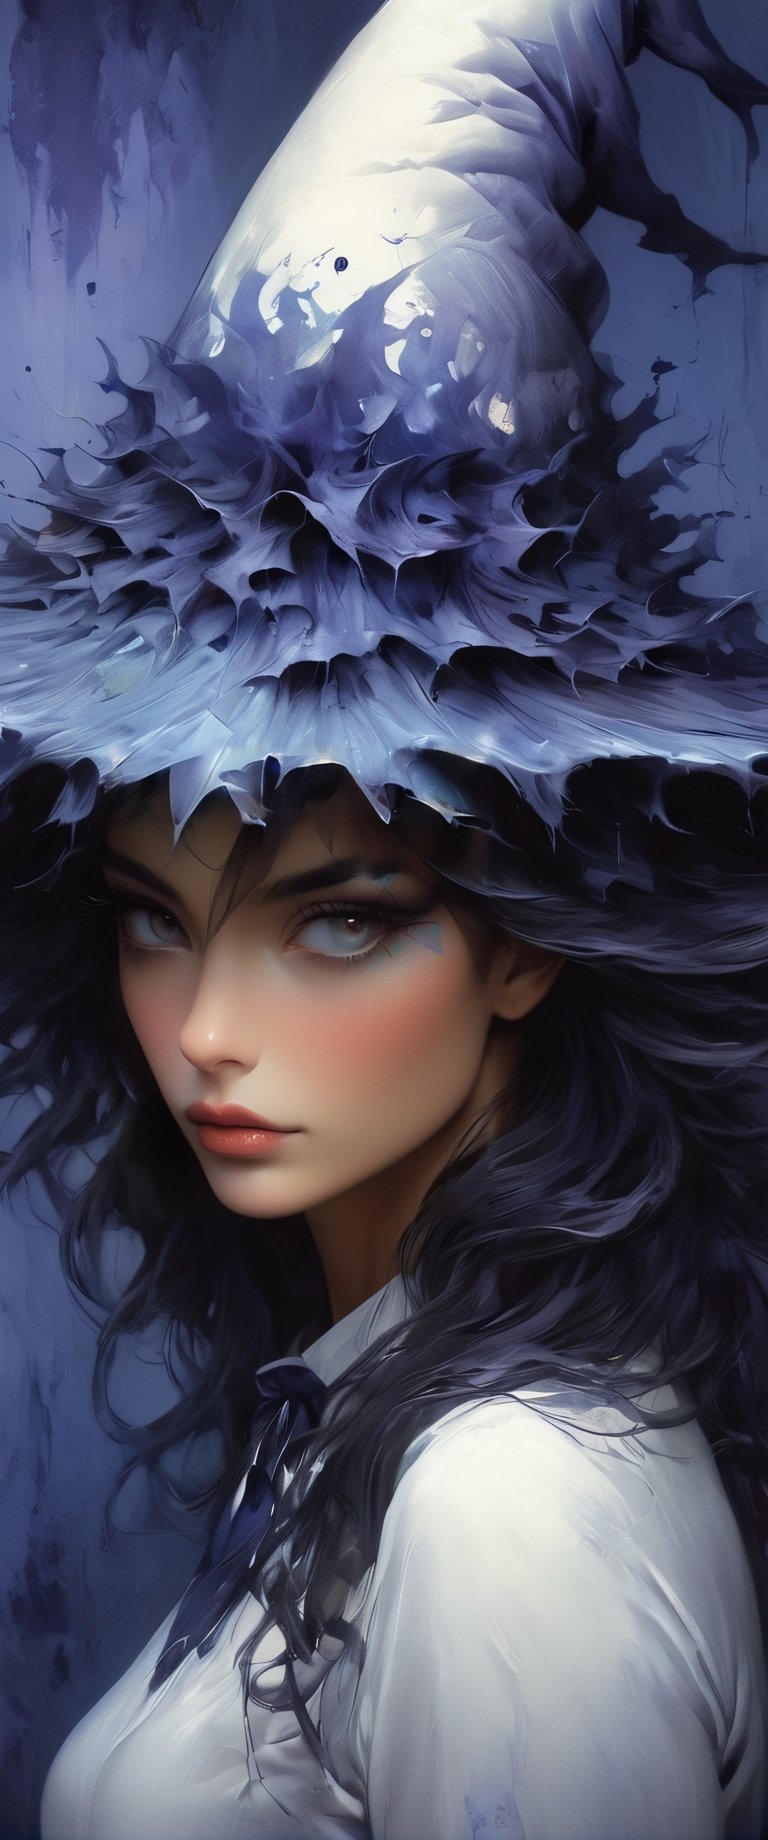 ((Add coprinus_comatus texture to her hat, witchhatshaped)), jagged edges, eye-catching detail, insanely intricate, vibrant light and shadow, beauty, textured, captivating, style of oil painting, modern ink, watercolor , brush strokes, negative white space,InkyCapWitchyHat,coprinus_comatus,ct-niji2,sooyaaa,porcellana style,DonMn1ghtm4reXL